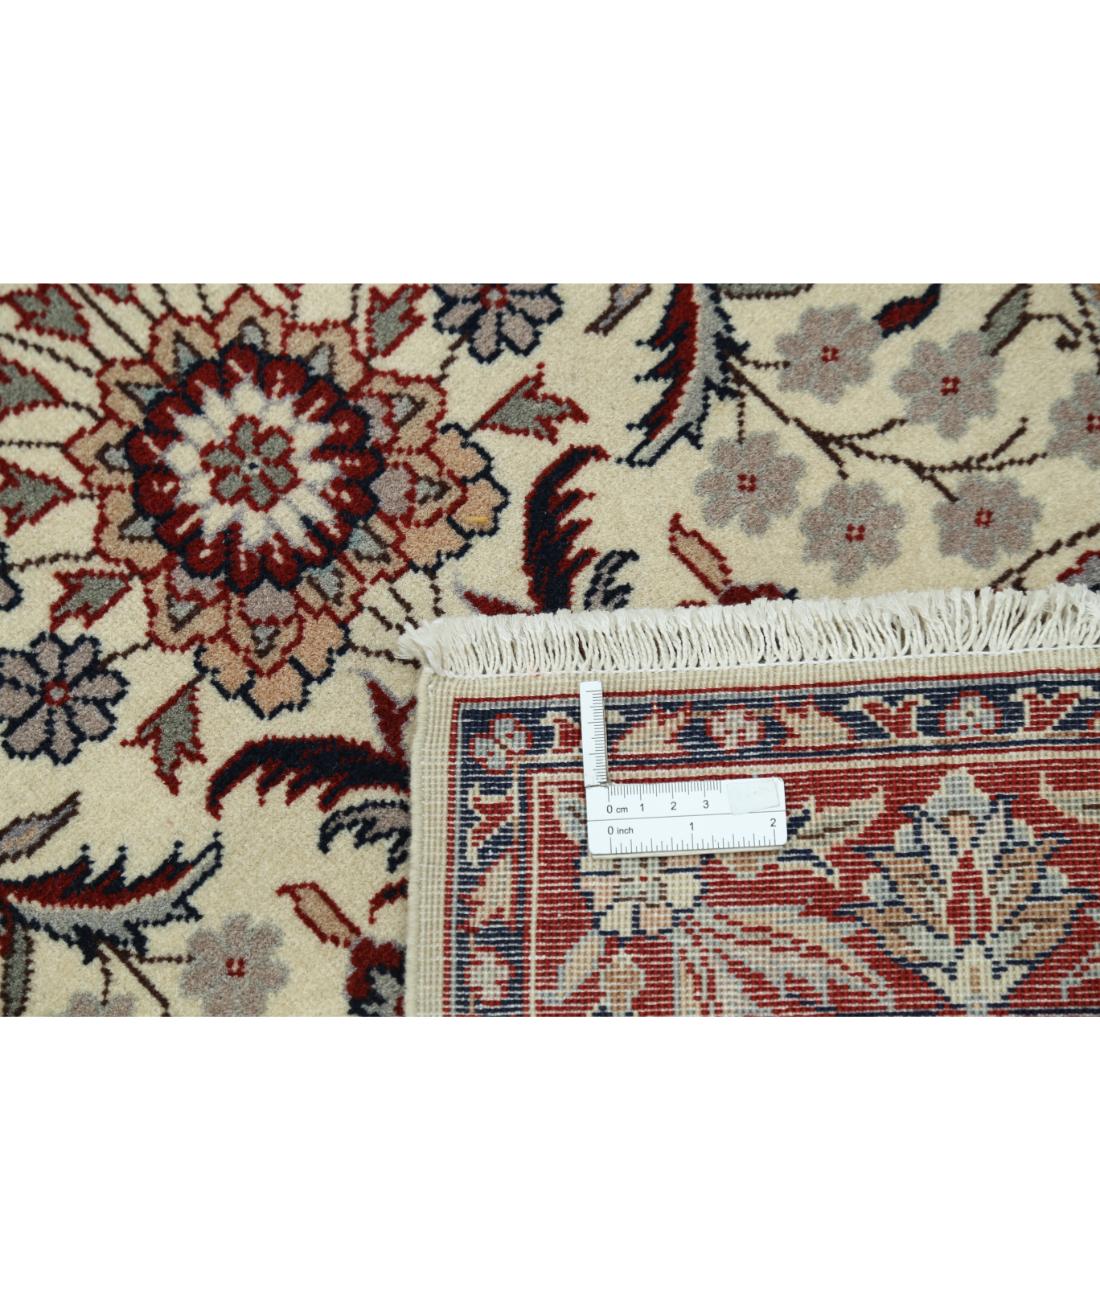 Heritage 2' 6" X 14' 0" Hand-Knotted Wool Rug 2' 6" X 14' 0" (76 X 427) / Ivory / Red